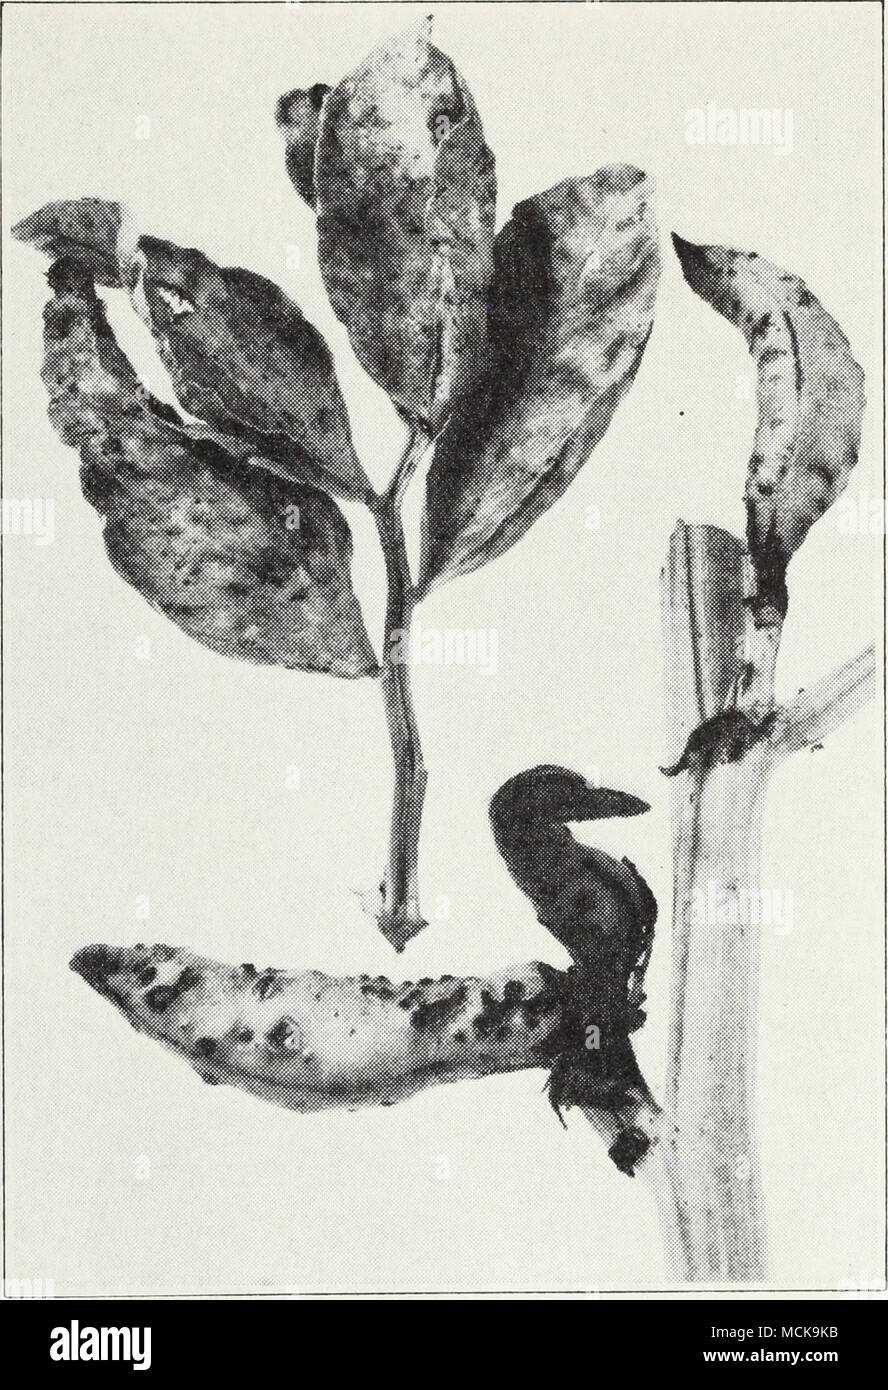 . Fig. 28.— Scab disease of horse bean. affected, and again the disease seems to become established or spread in certain spots in the field like a fusarinm wilt, which this trouble resem- bles in some respects. Considerable work has failed, however, to isolate any fungus from plants showing this disease, which is the commonest one attacking horse beans in California. No specific control for yellows can be suggested, but crop rotation is advisable for horse beans as a precaution against diseases and pests in general. Stock Photo